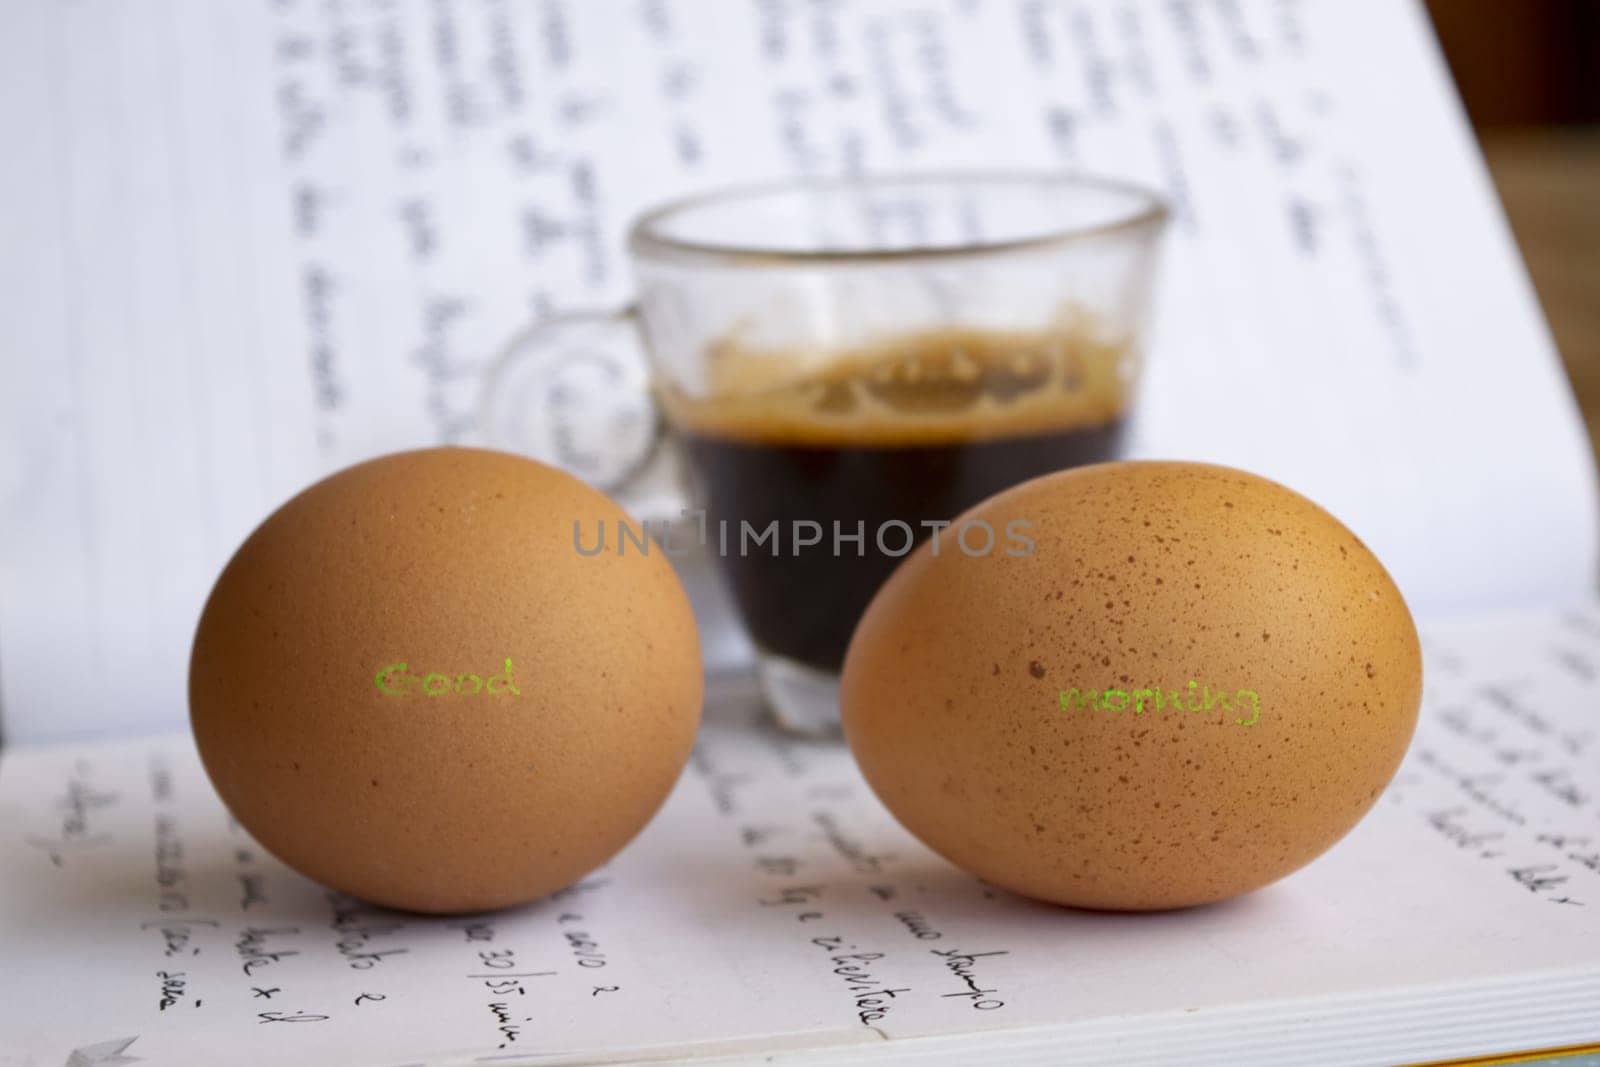 good morning message written on two eggs with a cup of coffee in the background